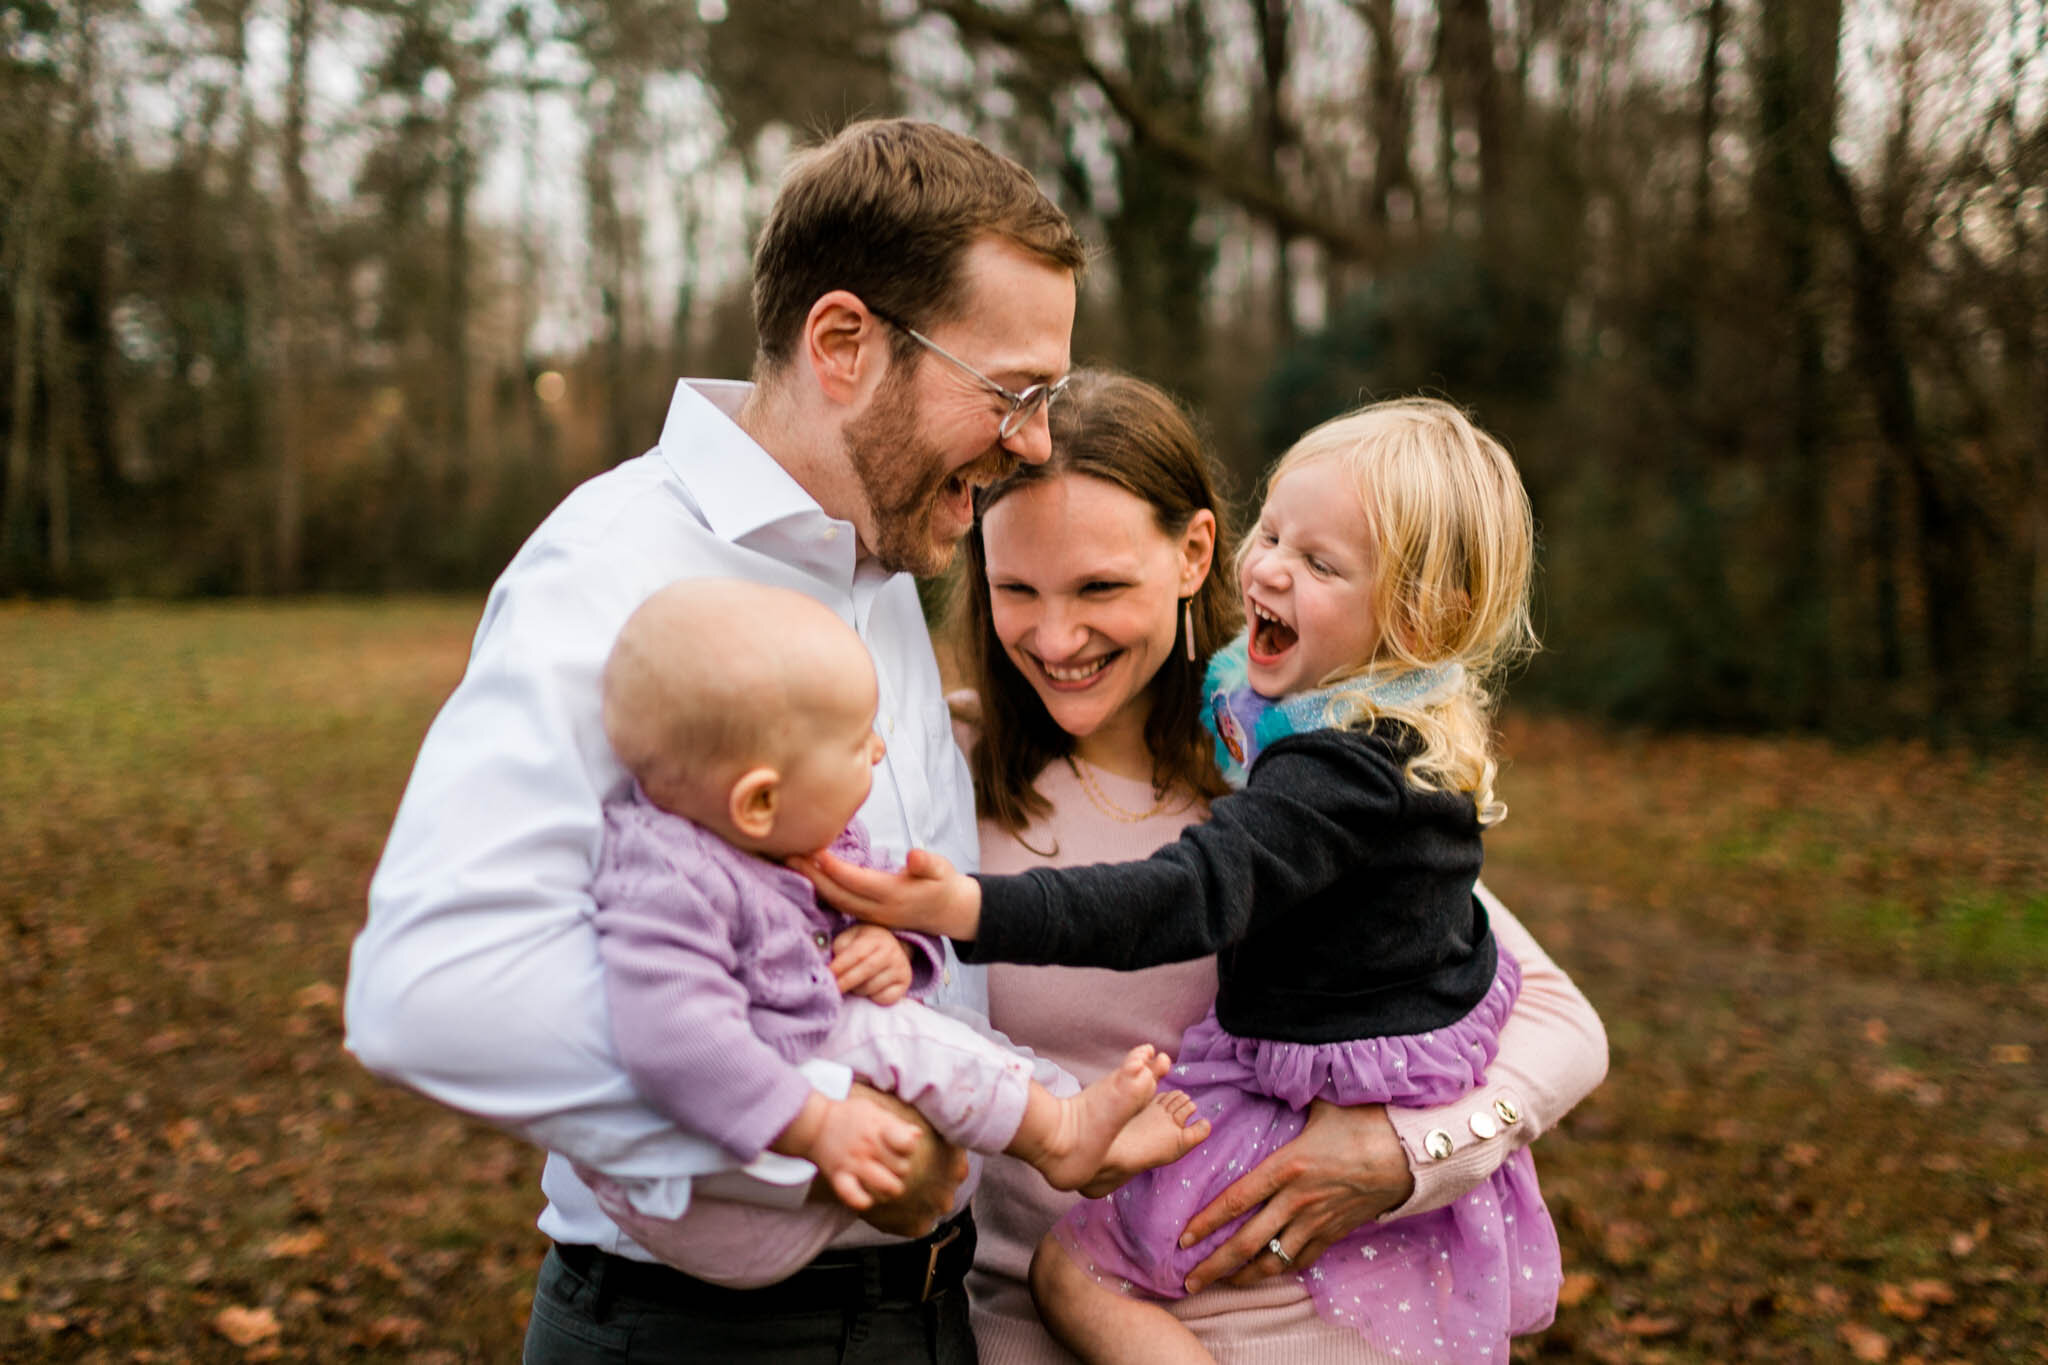 Durham Family Photographer | By G. Lin Photography | Family laughing together outside in grassy area